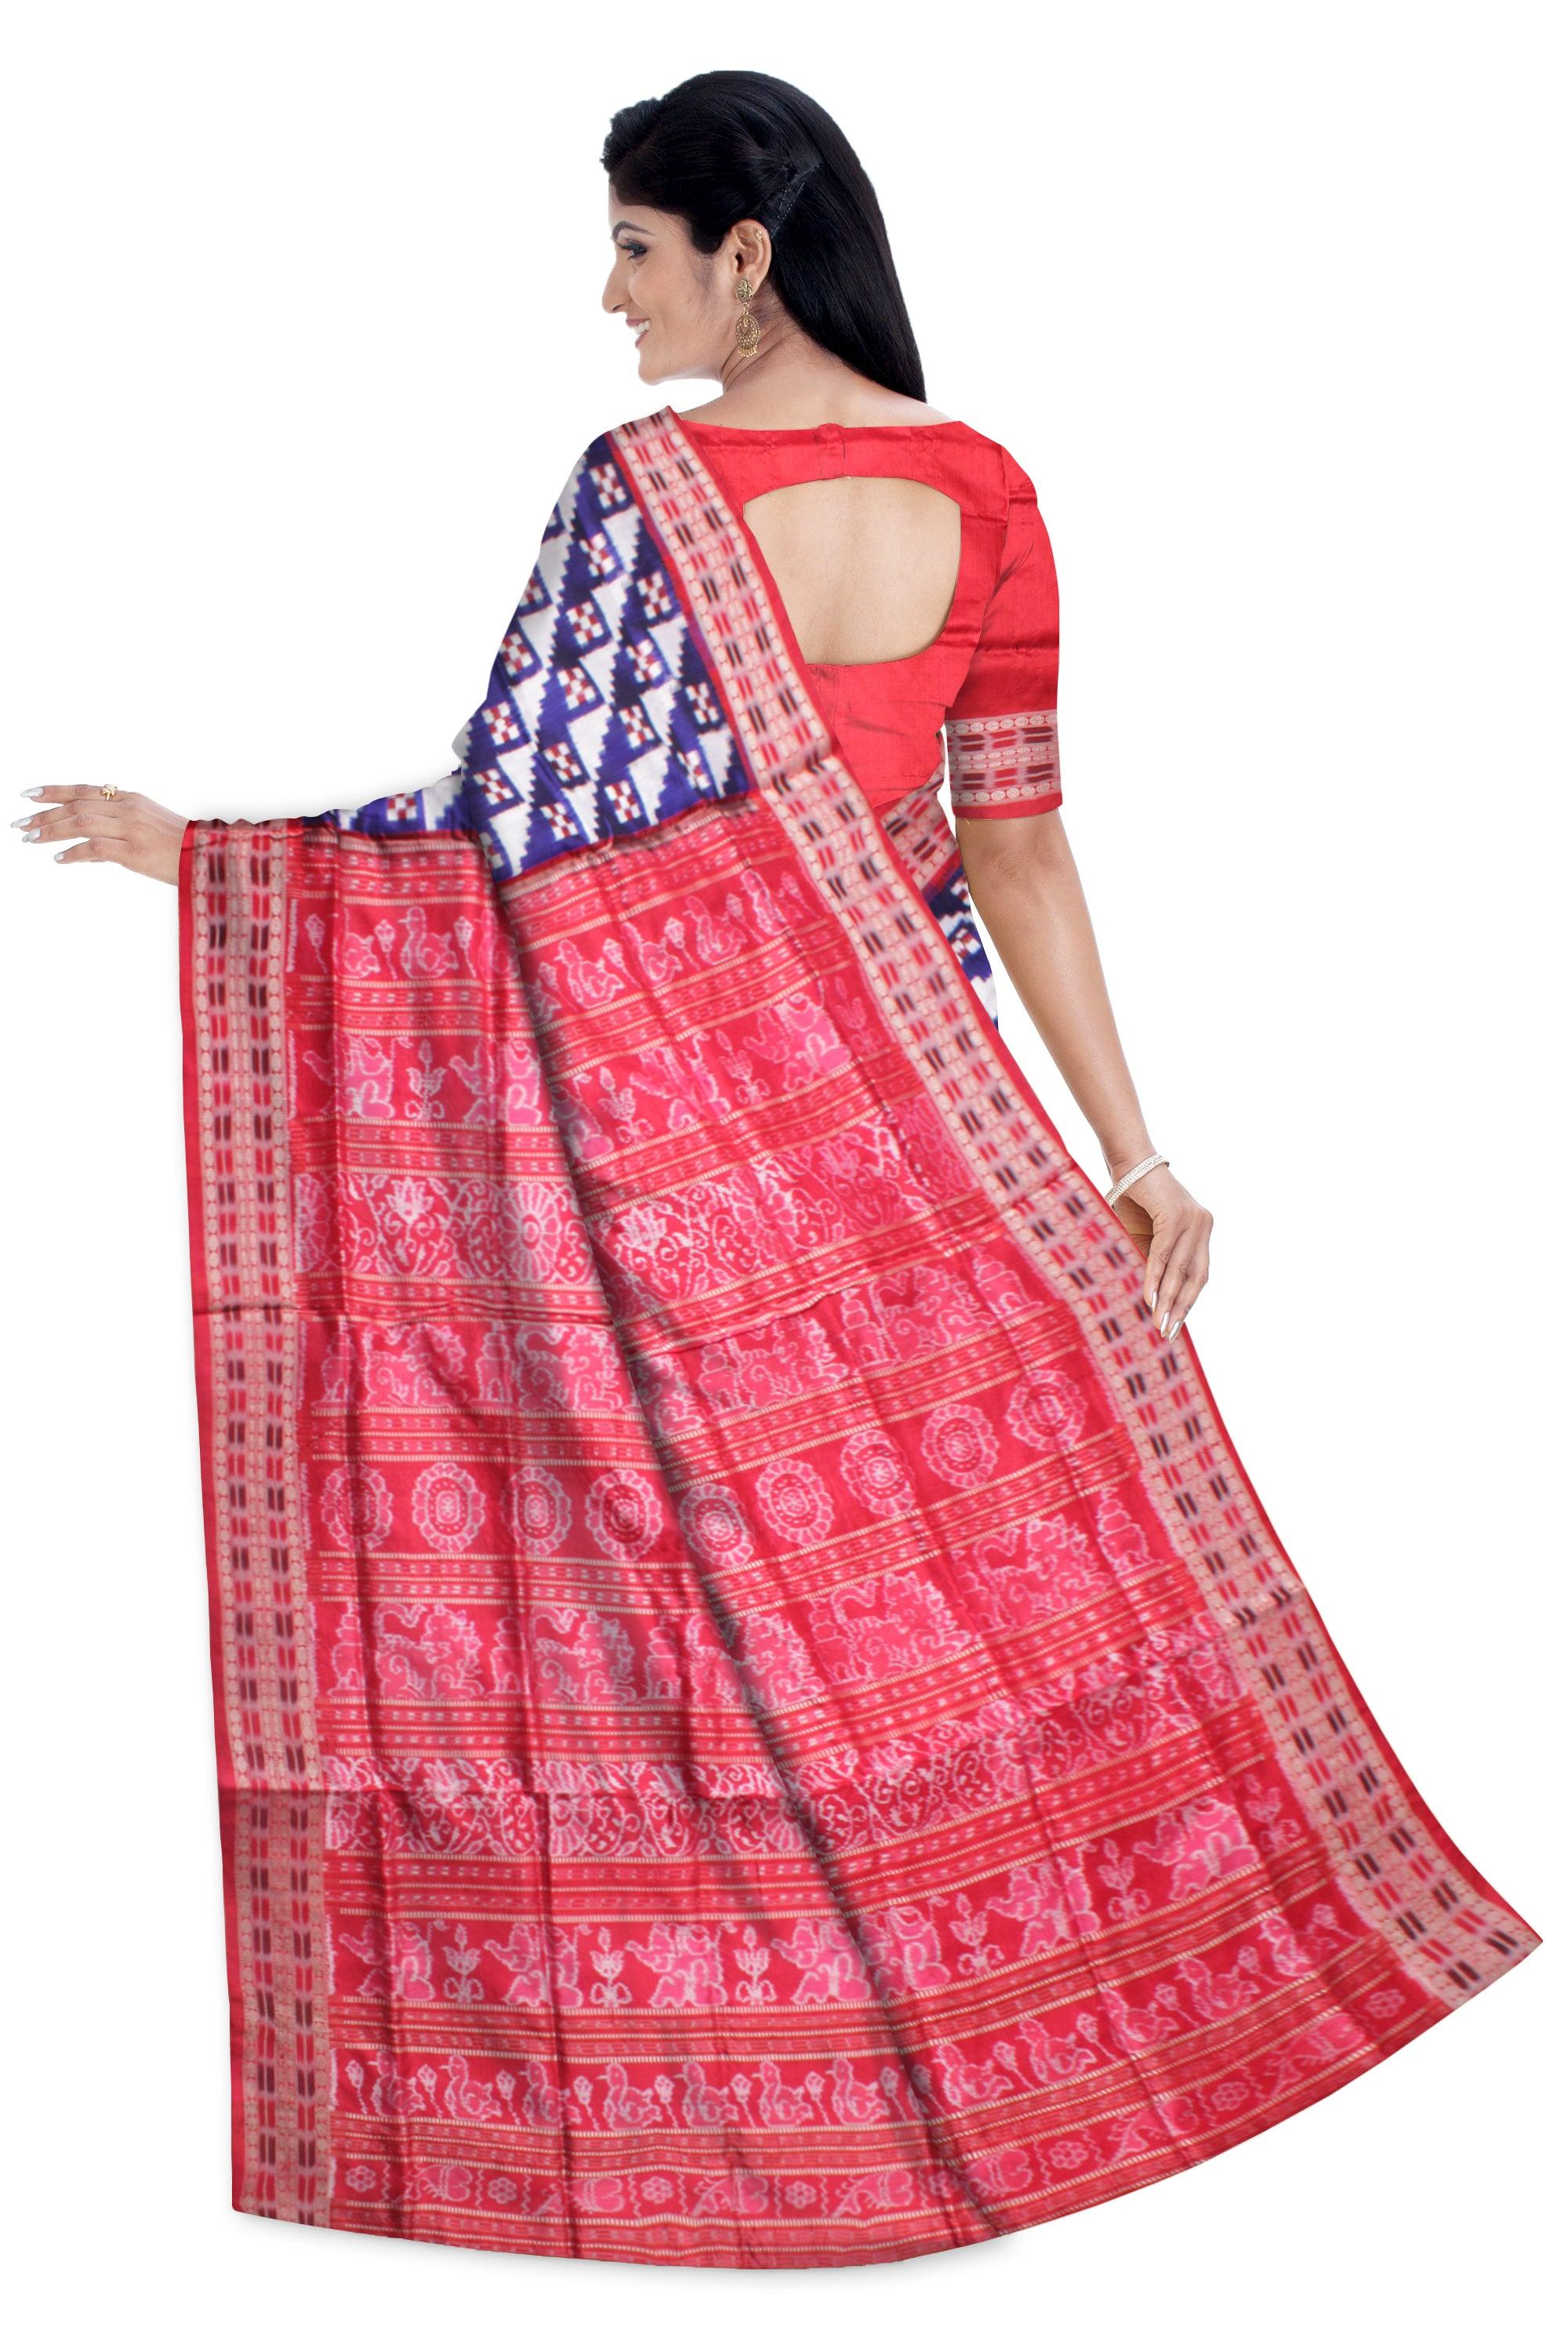 BLUE AND RED COLOR PASAPALI PATTERN PURE SILK SAREE, WITH BLOUSE PIECE. - Koshali Arts & Crafts Enterprise